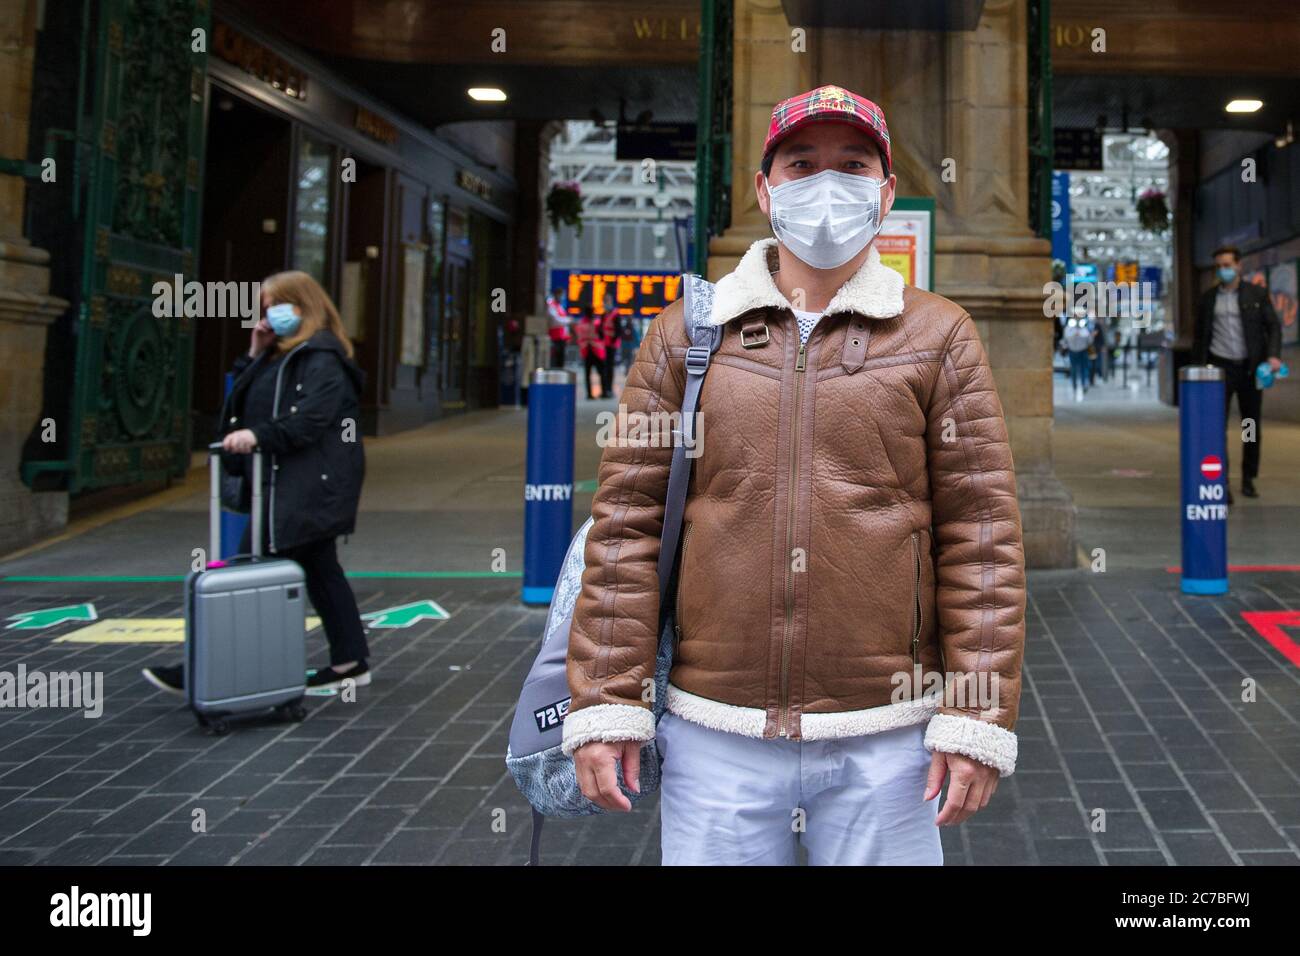 Glasgow, Scotland, UK. 16th July, 2020. Pictured: A tourist seen wearing a blue surgical face mask with a royal Stewart tartan baseball cap and brown leather bomber jacket, poses for a picture outside of Glasgow Central station. The Scottish Government made it mandatory that face coverings are worn when travelling on public transport in Scotland to help prevent the spread of coronavirus. Credit: Colin Fisher/Alamy Live News Stock Photo